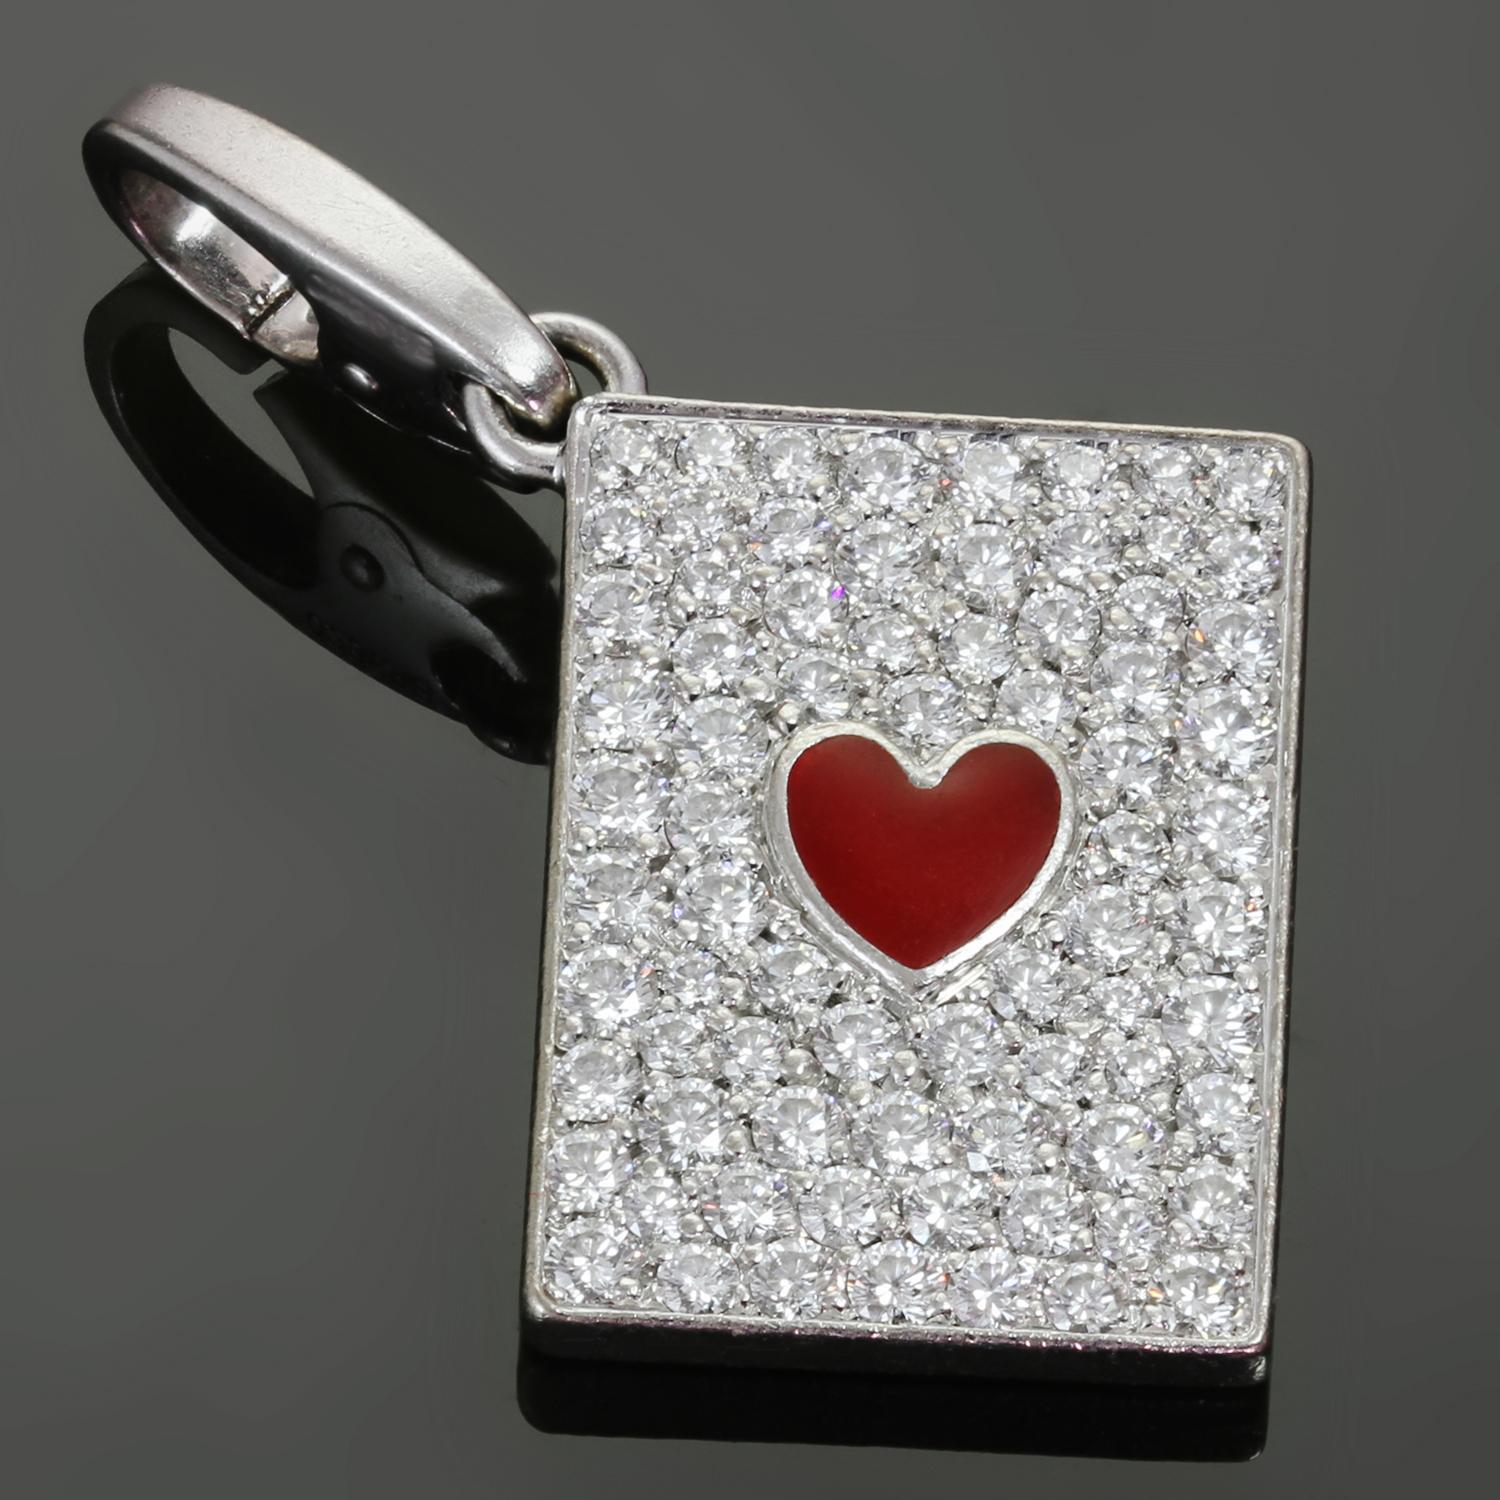 This authentic rare Cartier pendant is crafted in 18k white gold and features a red enamel heart in the center surrounded with about 80 pave brilliant-cut round D-E-F VVS1-VVS2 diamonds weighing an estimated 1.50 carats. The reverse of the charm